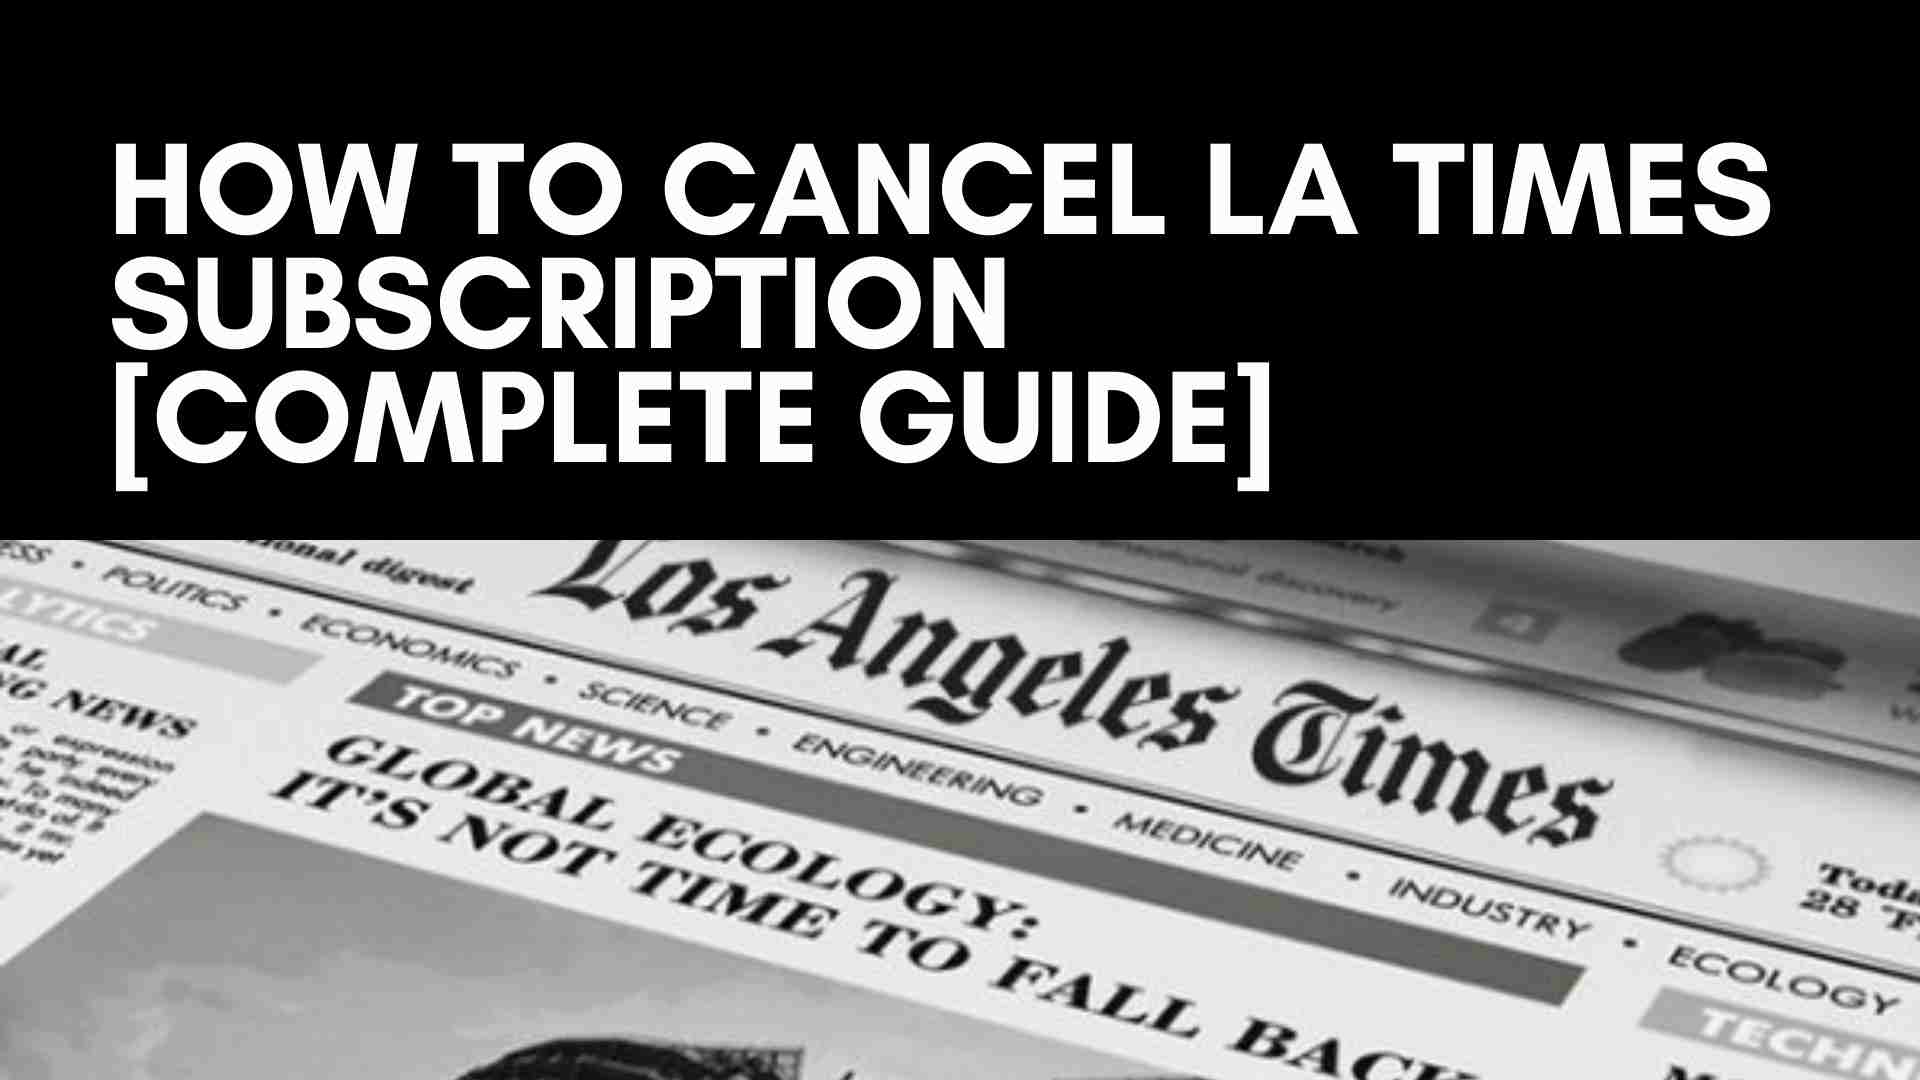 How to Cancel LA Times Subscription